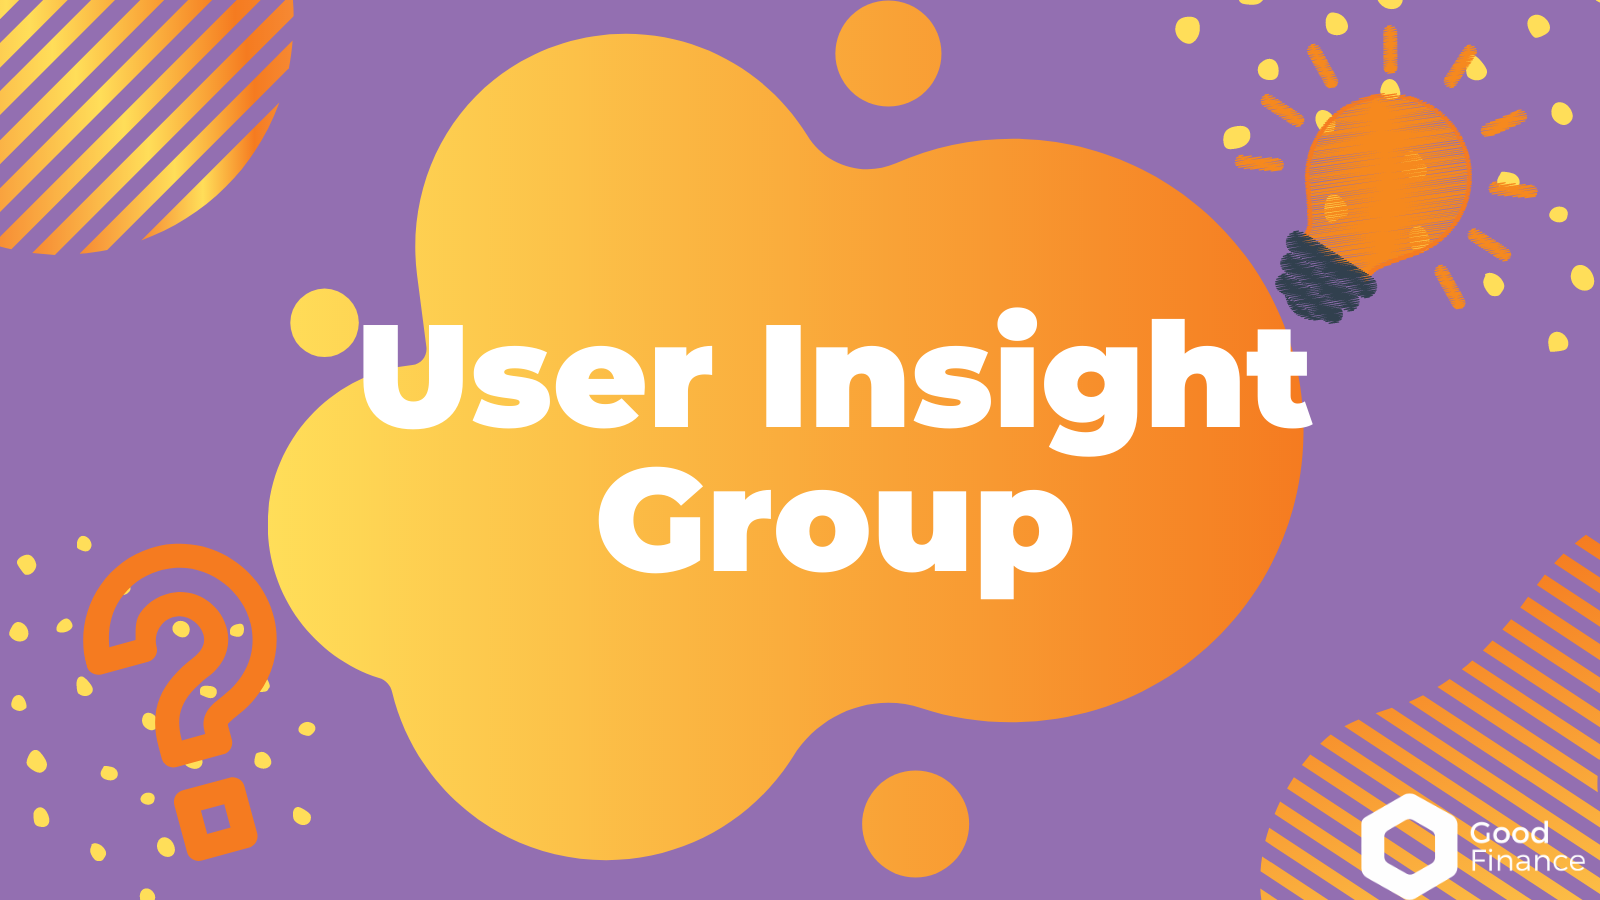 User insight Group graphic